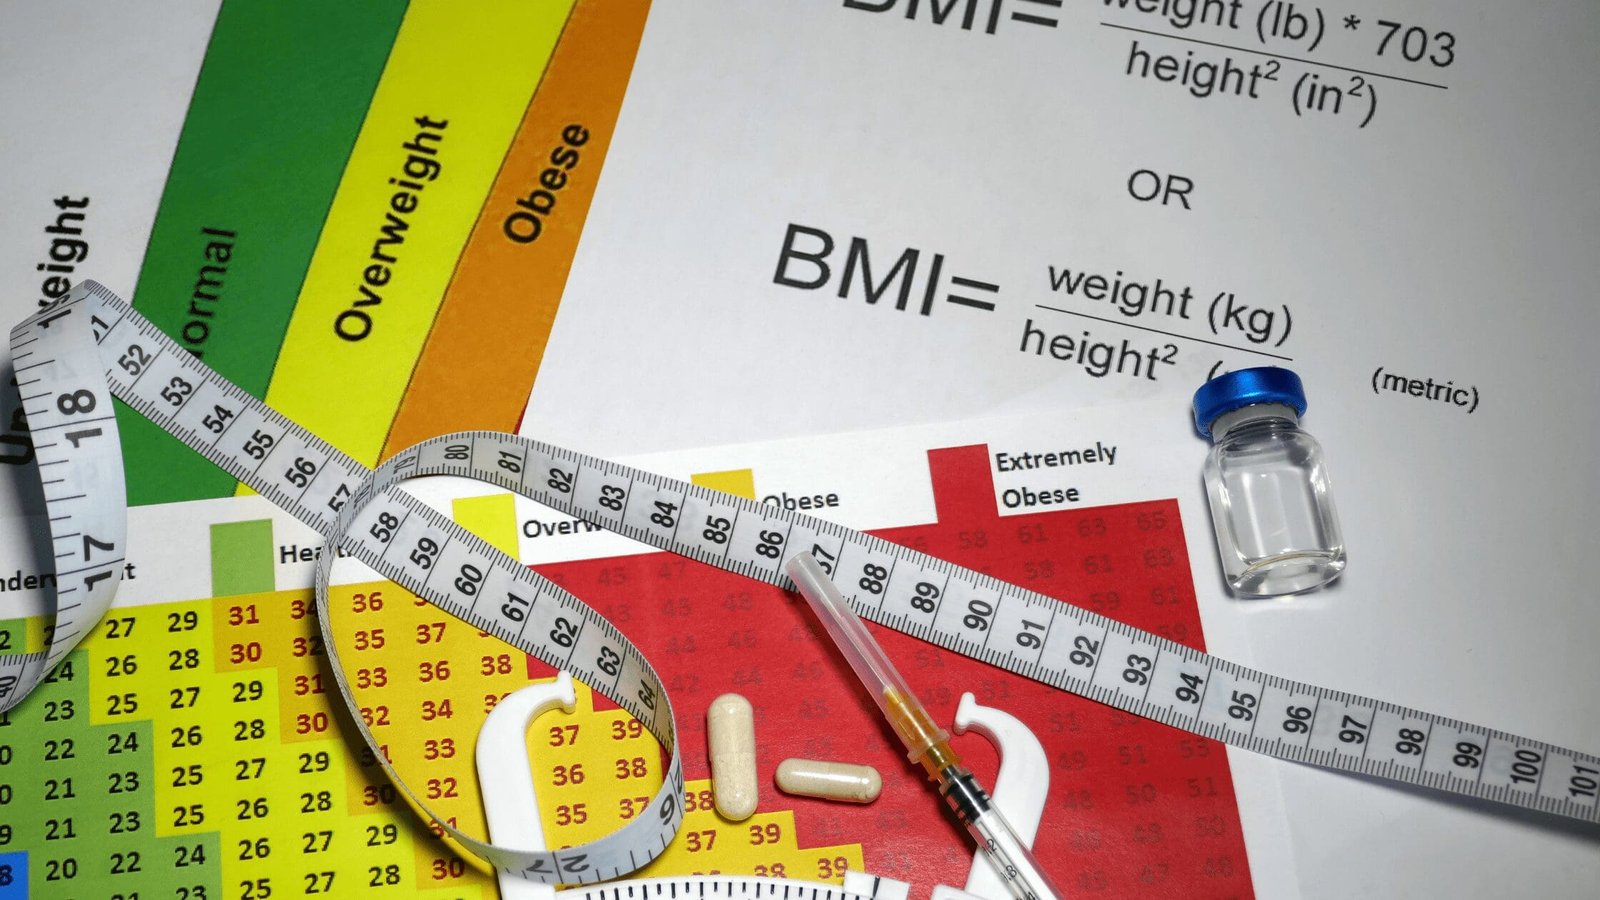 Bariatric and obesity